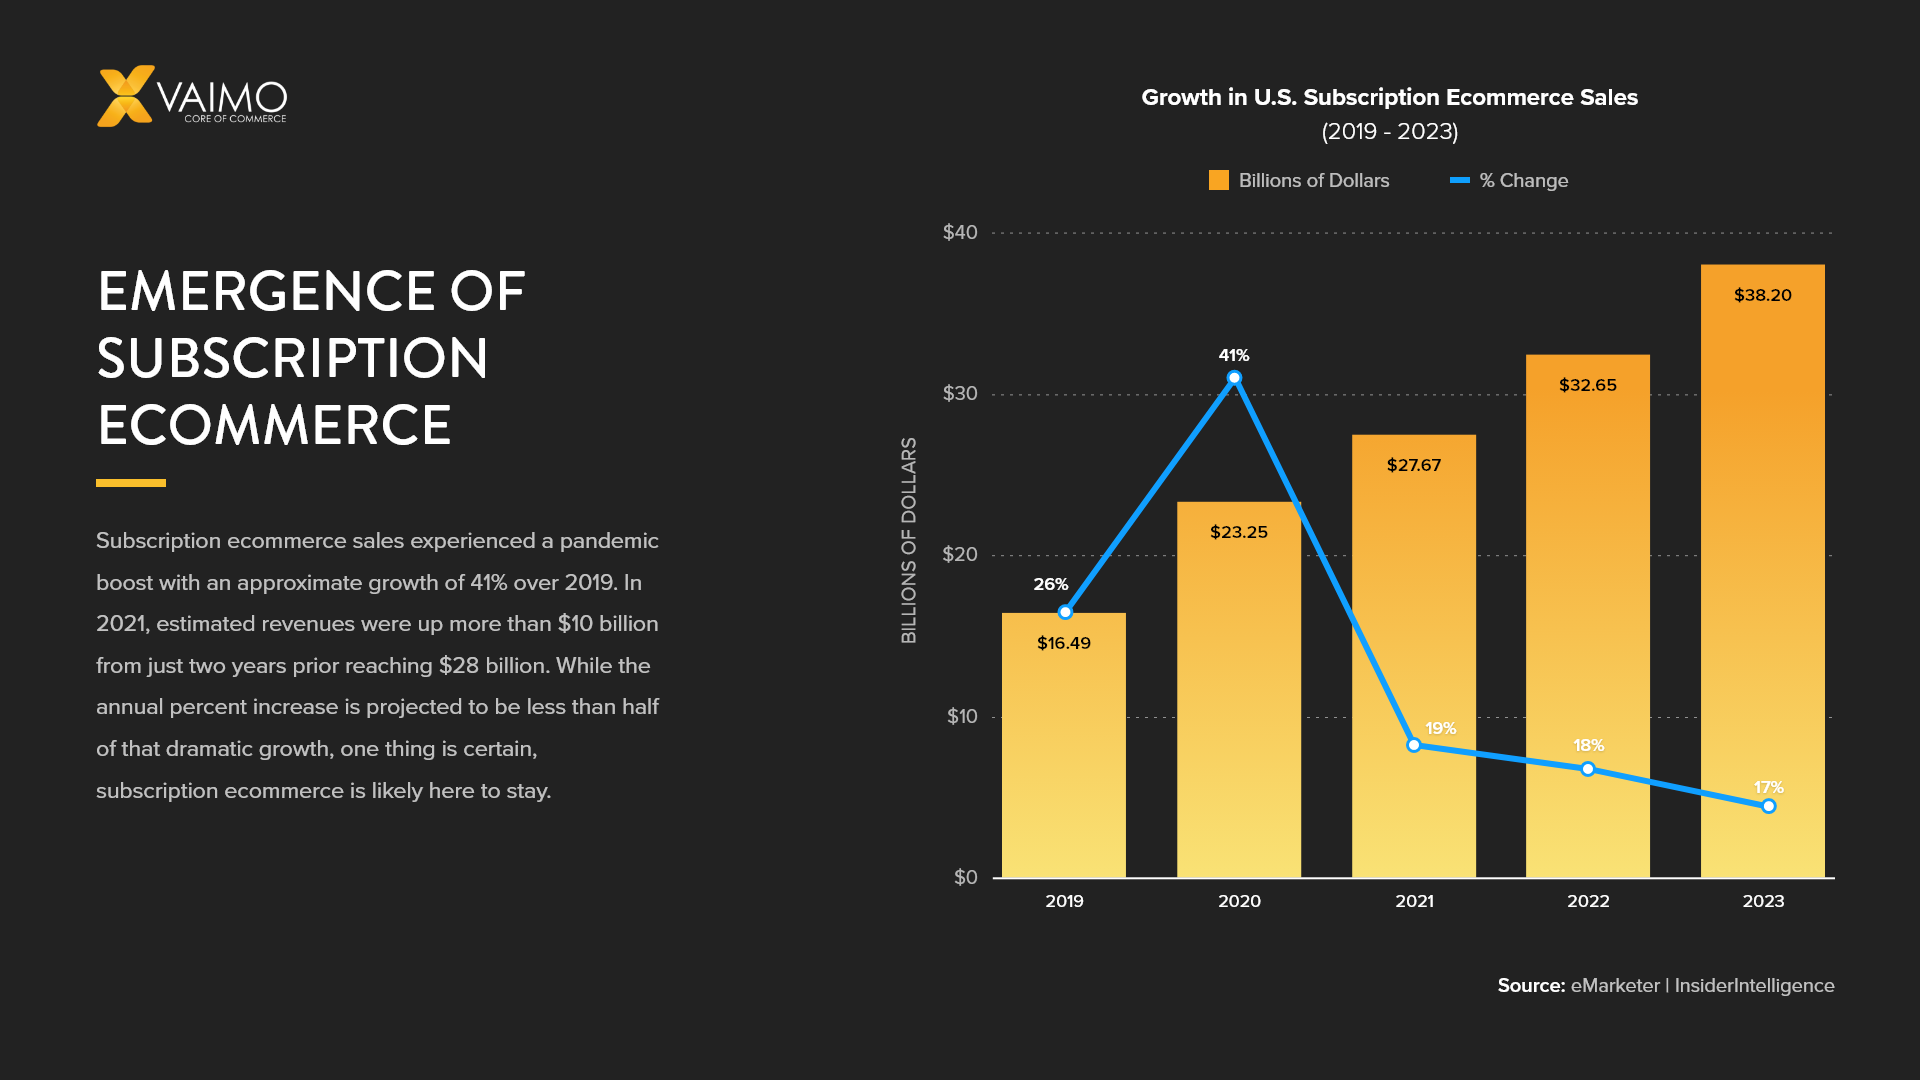 Growth in U.S. subscription ecommerce sales